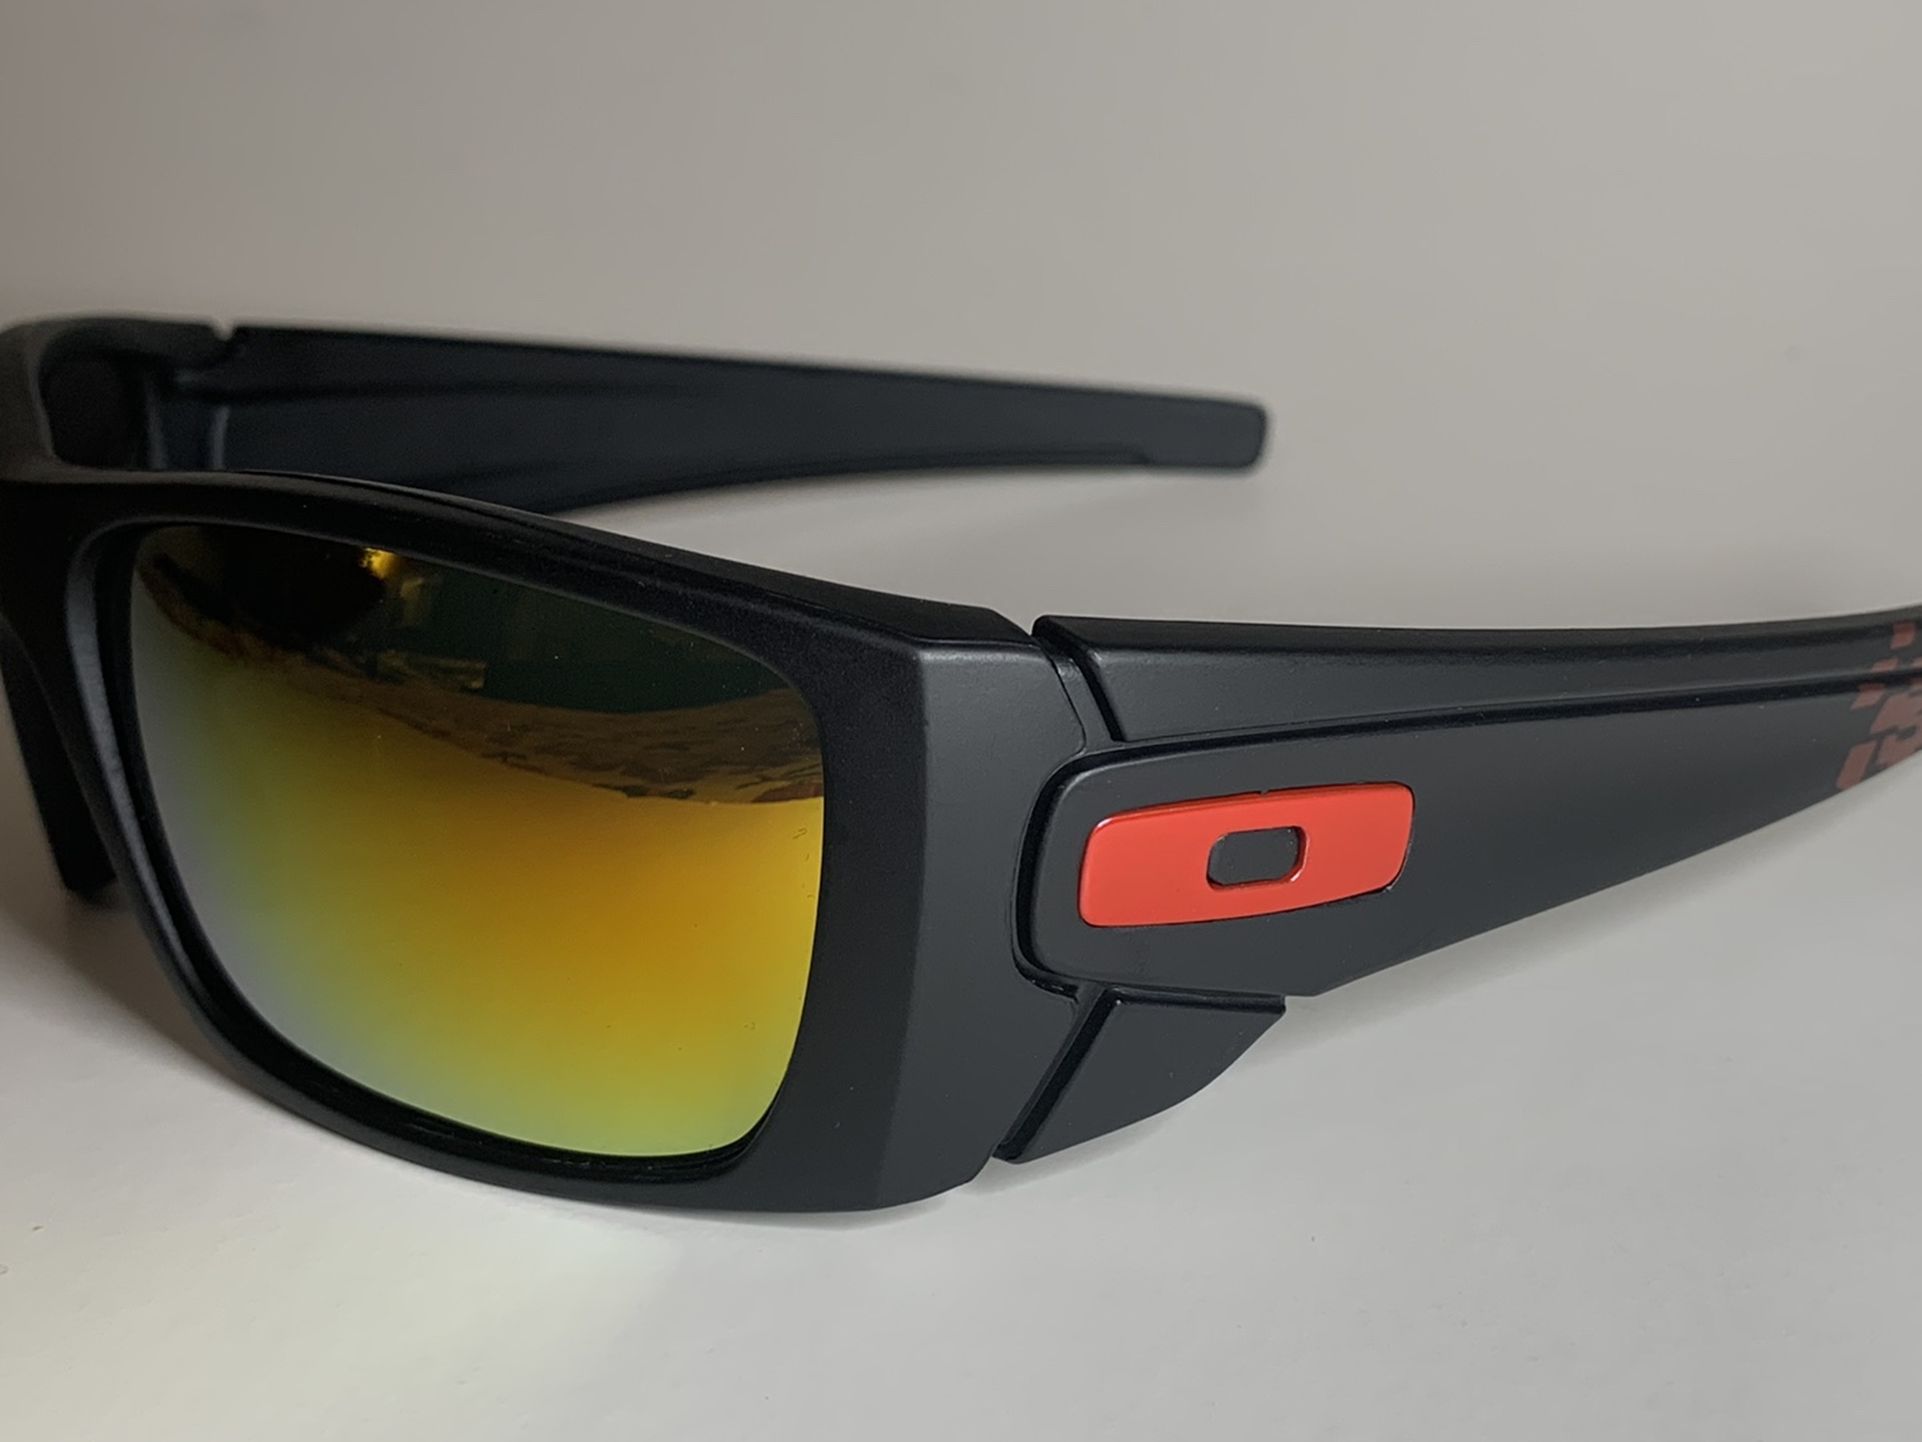 Brand new MENS sunglasses Oakley FUELCELL style Pick up Lake Forest Mon-fri 8am-3pm